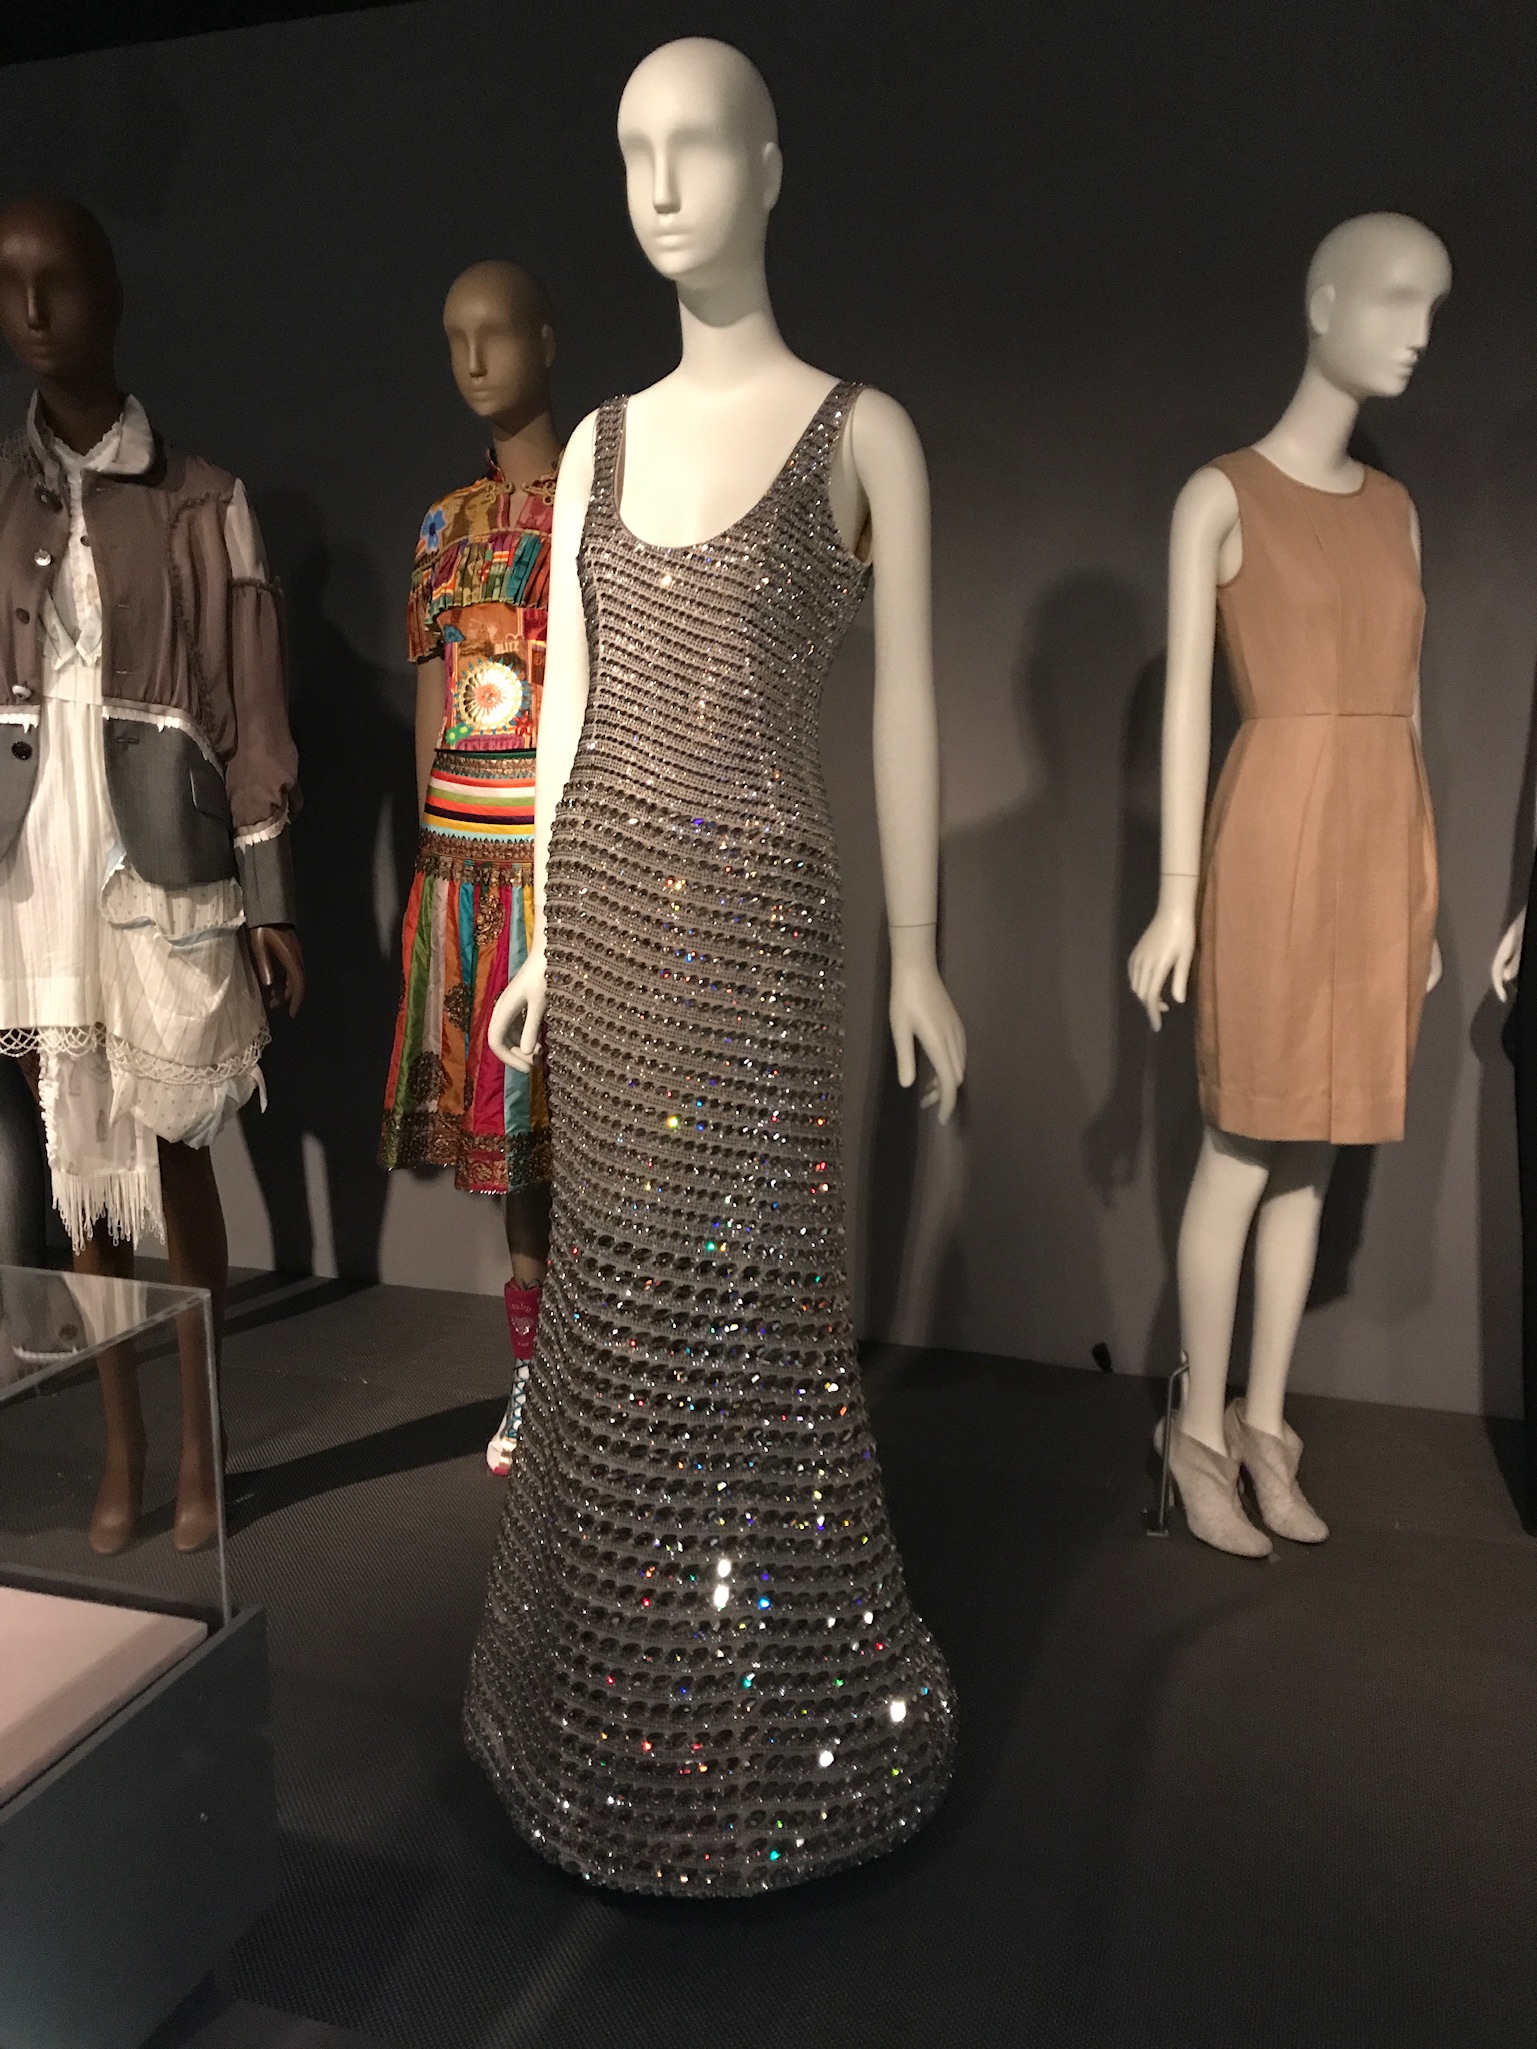 “Paris, Capital of Fashion” at FIT | French-American Cultural Foundation